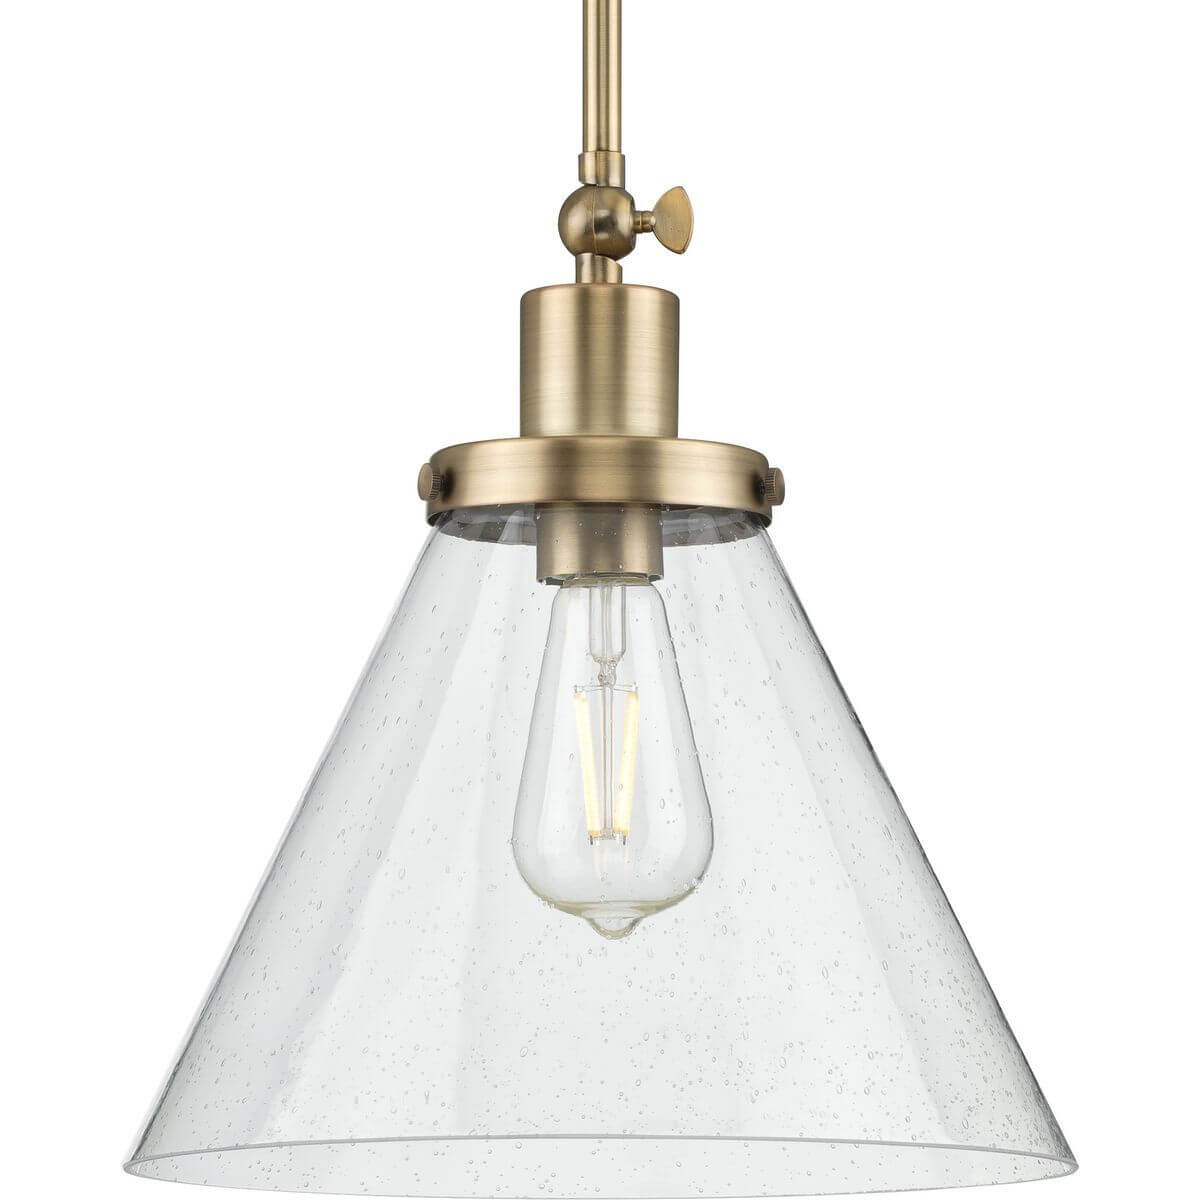 Progress Lighting Hinton 1 Light 12 inch Pendant in Vintage Brass with Clear Seeded Glass P500324-163